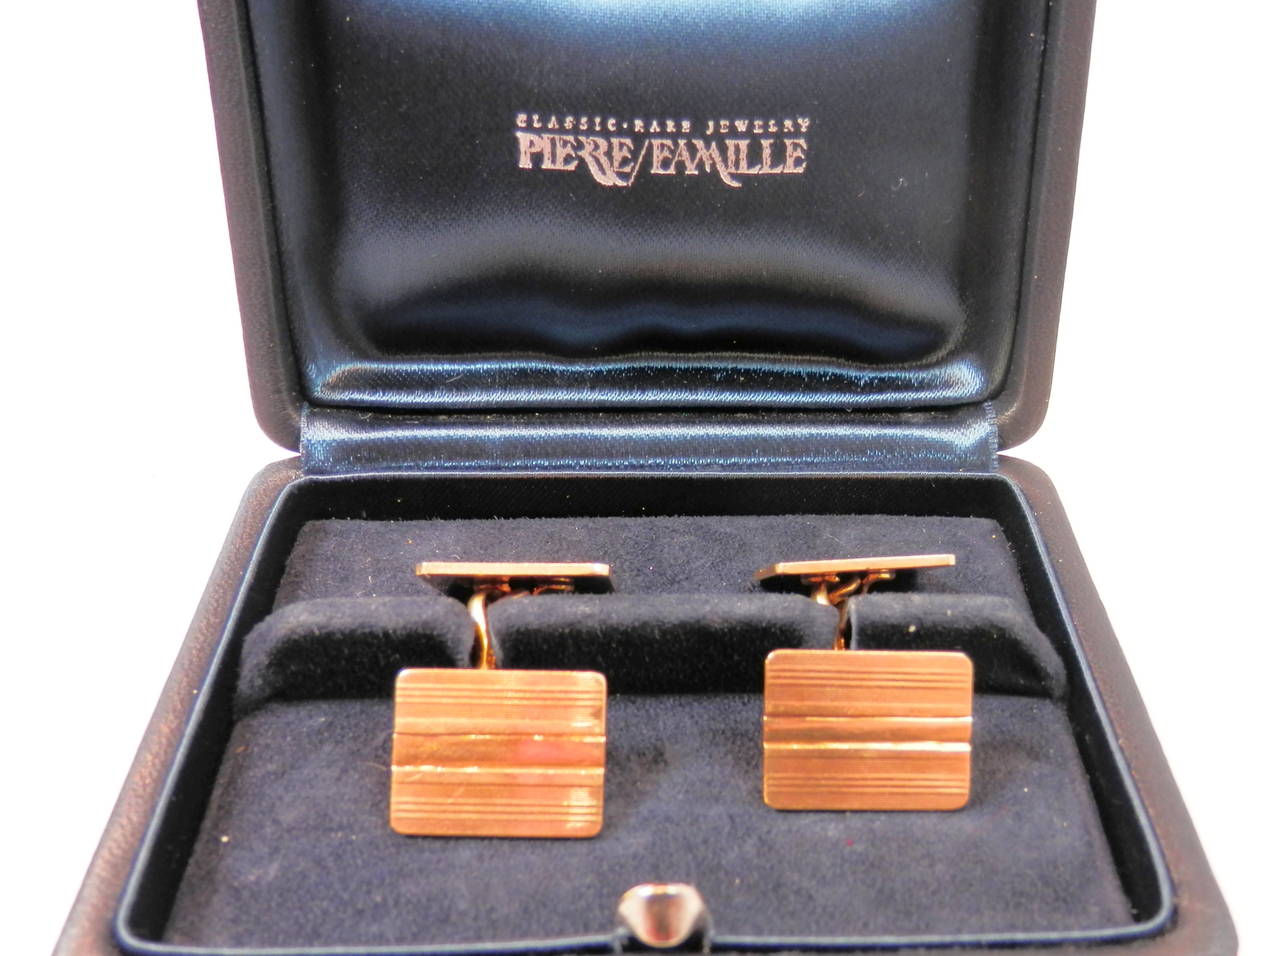 18K yellow gold rectangular back to back cufflinks  with  conservative stripes There is a center solid element which makes it easier to put the cufflinks on. Signed in block letters: Cartier.  Circa 1935